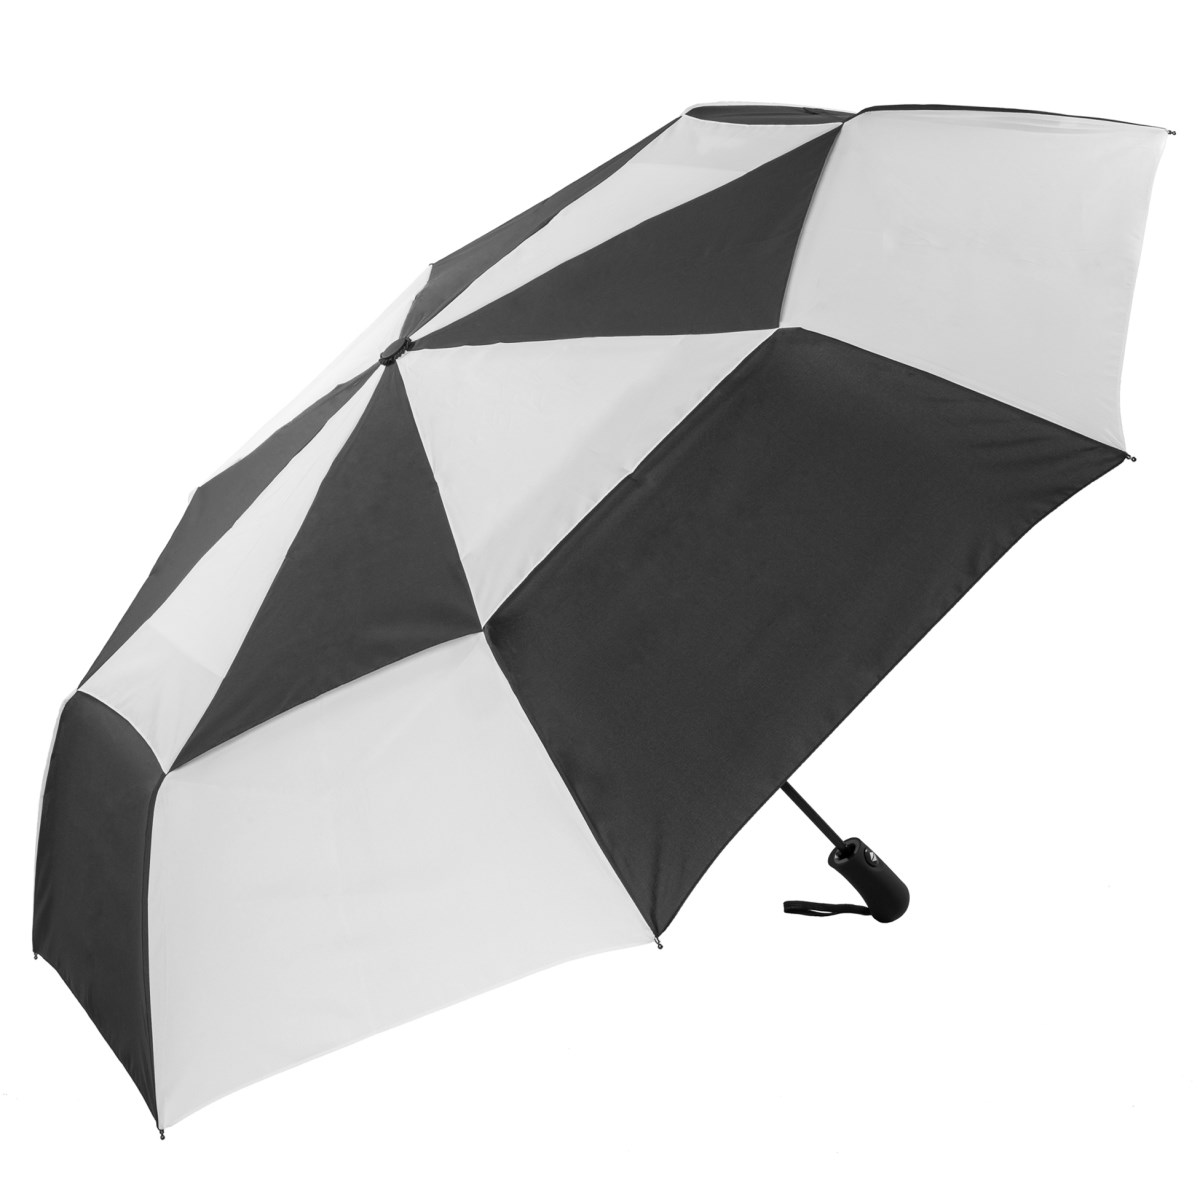 XL Canopy Folding Golf Umbrella Automatic Wind-Resistant- Black and White (31713)